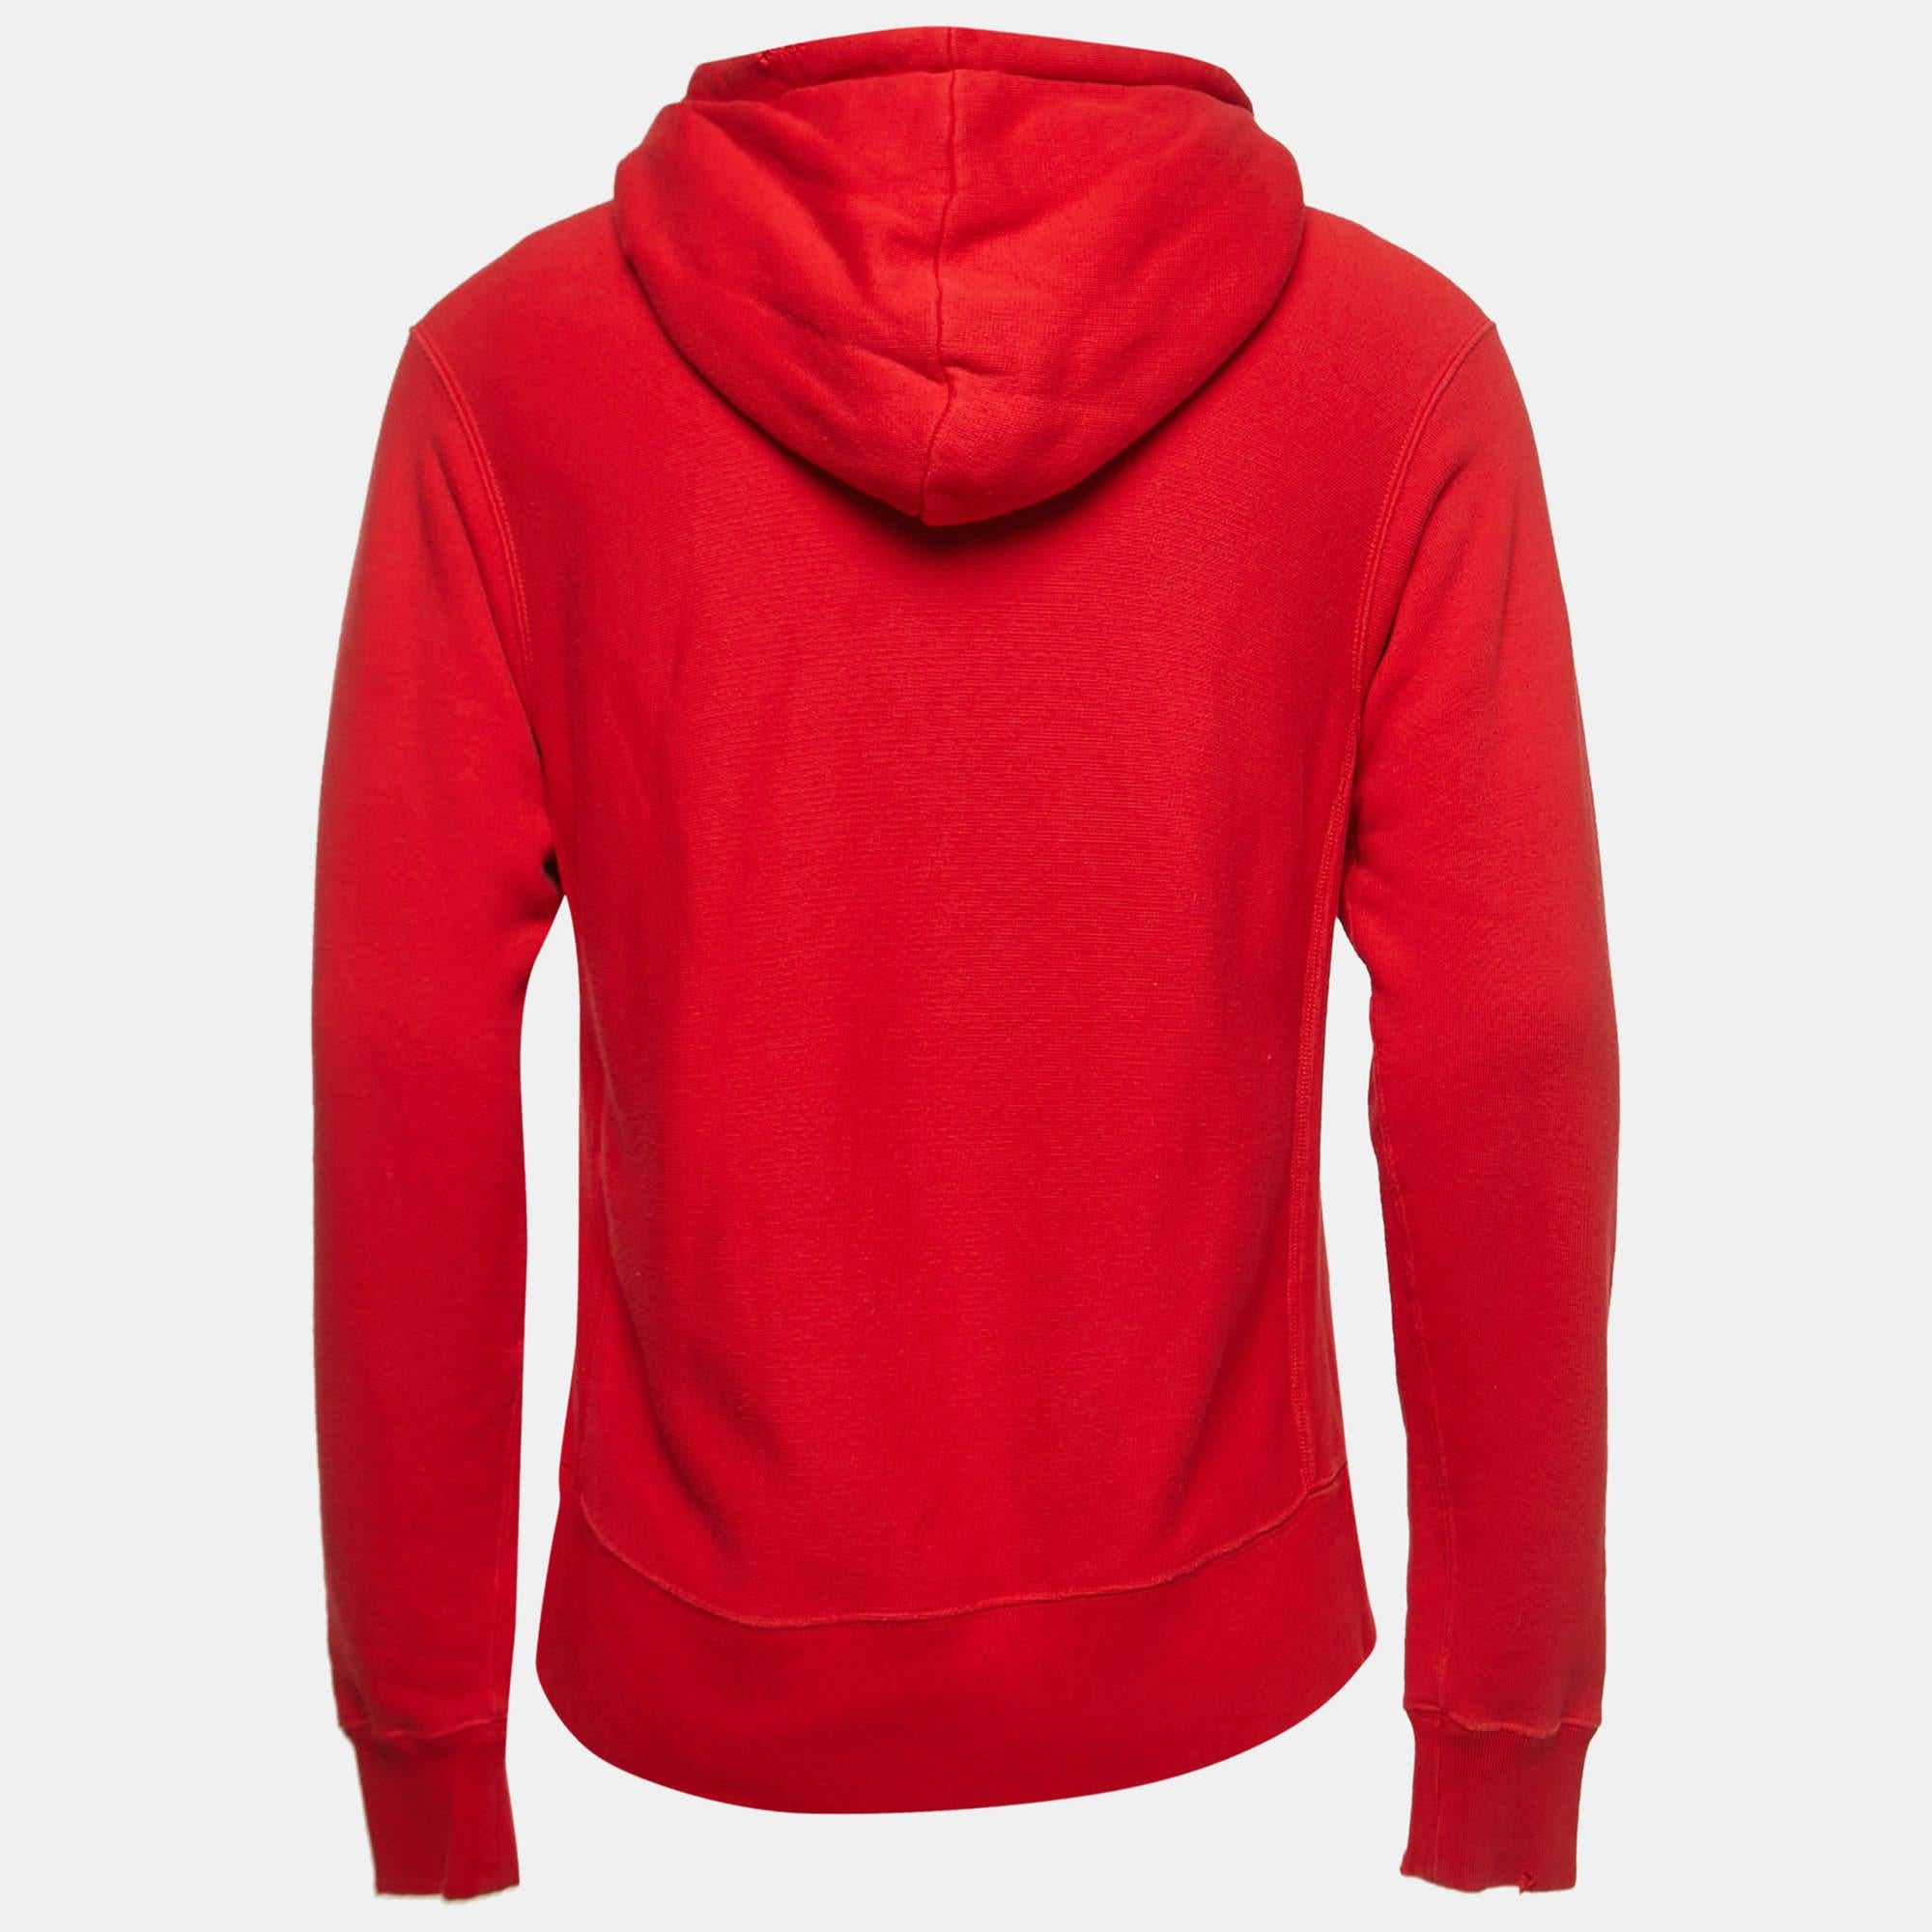 This Gucci red hoodie for men has a regular fit. Made of cotton, it has long sleeves, a hood, a front zipper, and a Donald Duck patch on the front. Embrace all-day comfort with this creation.

